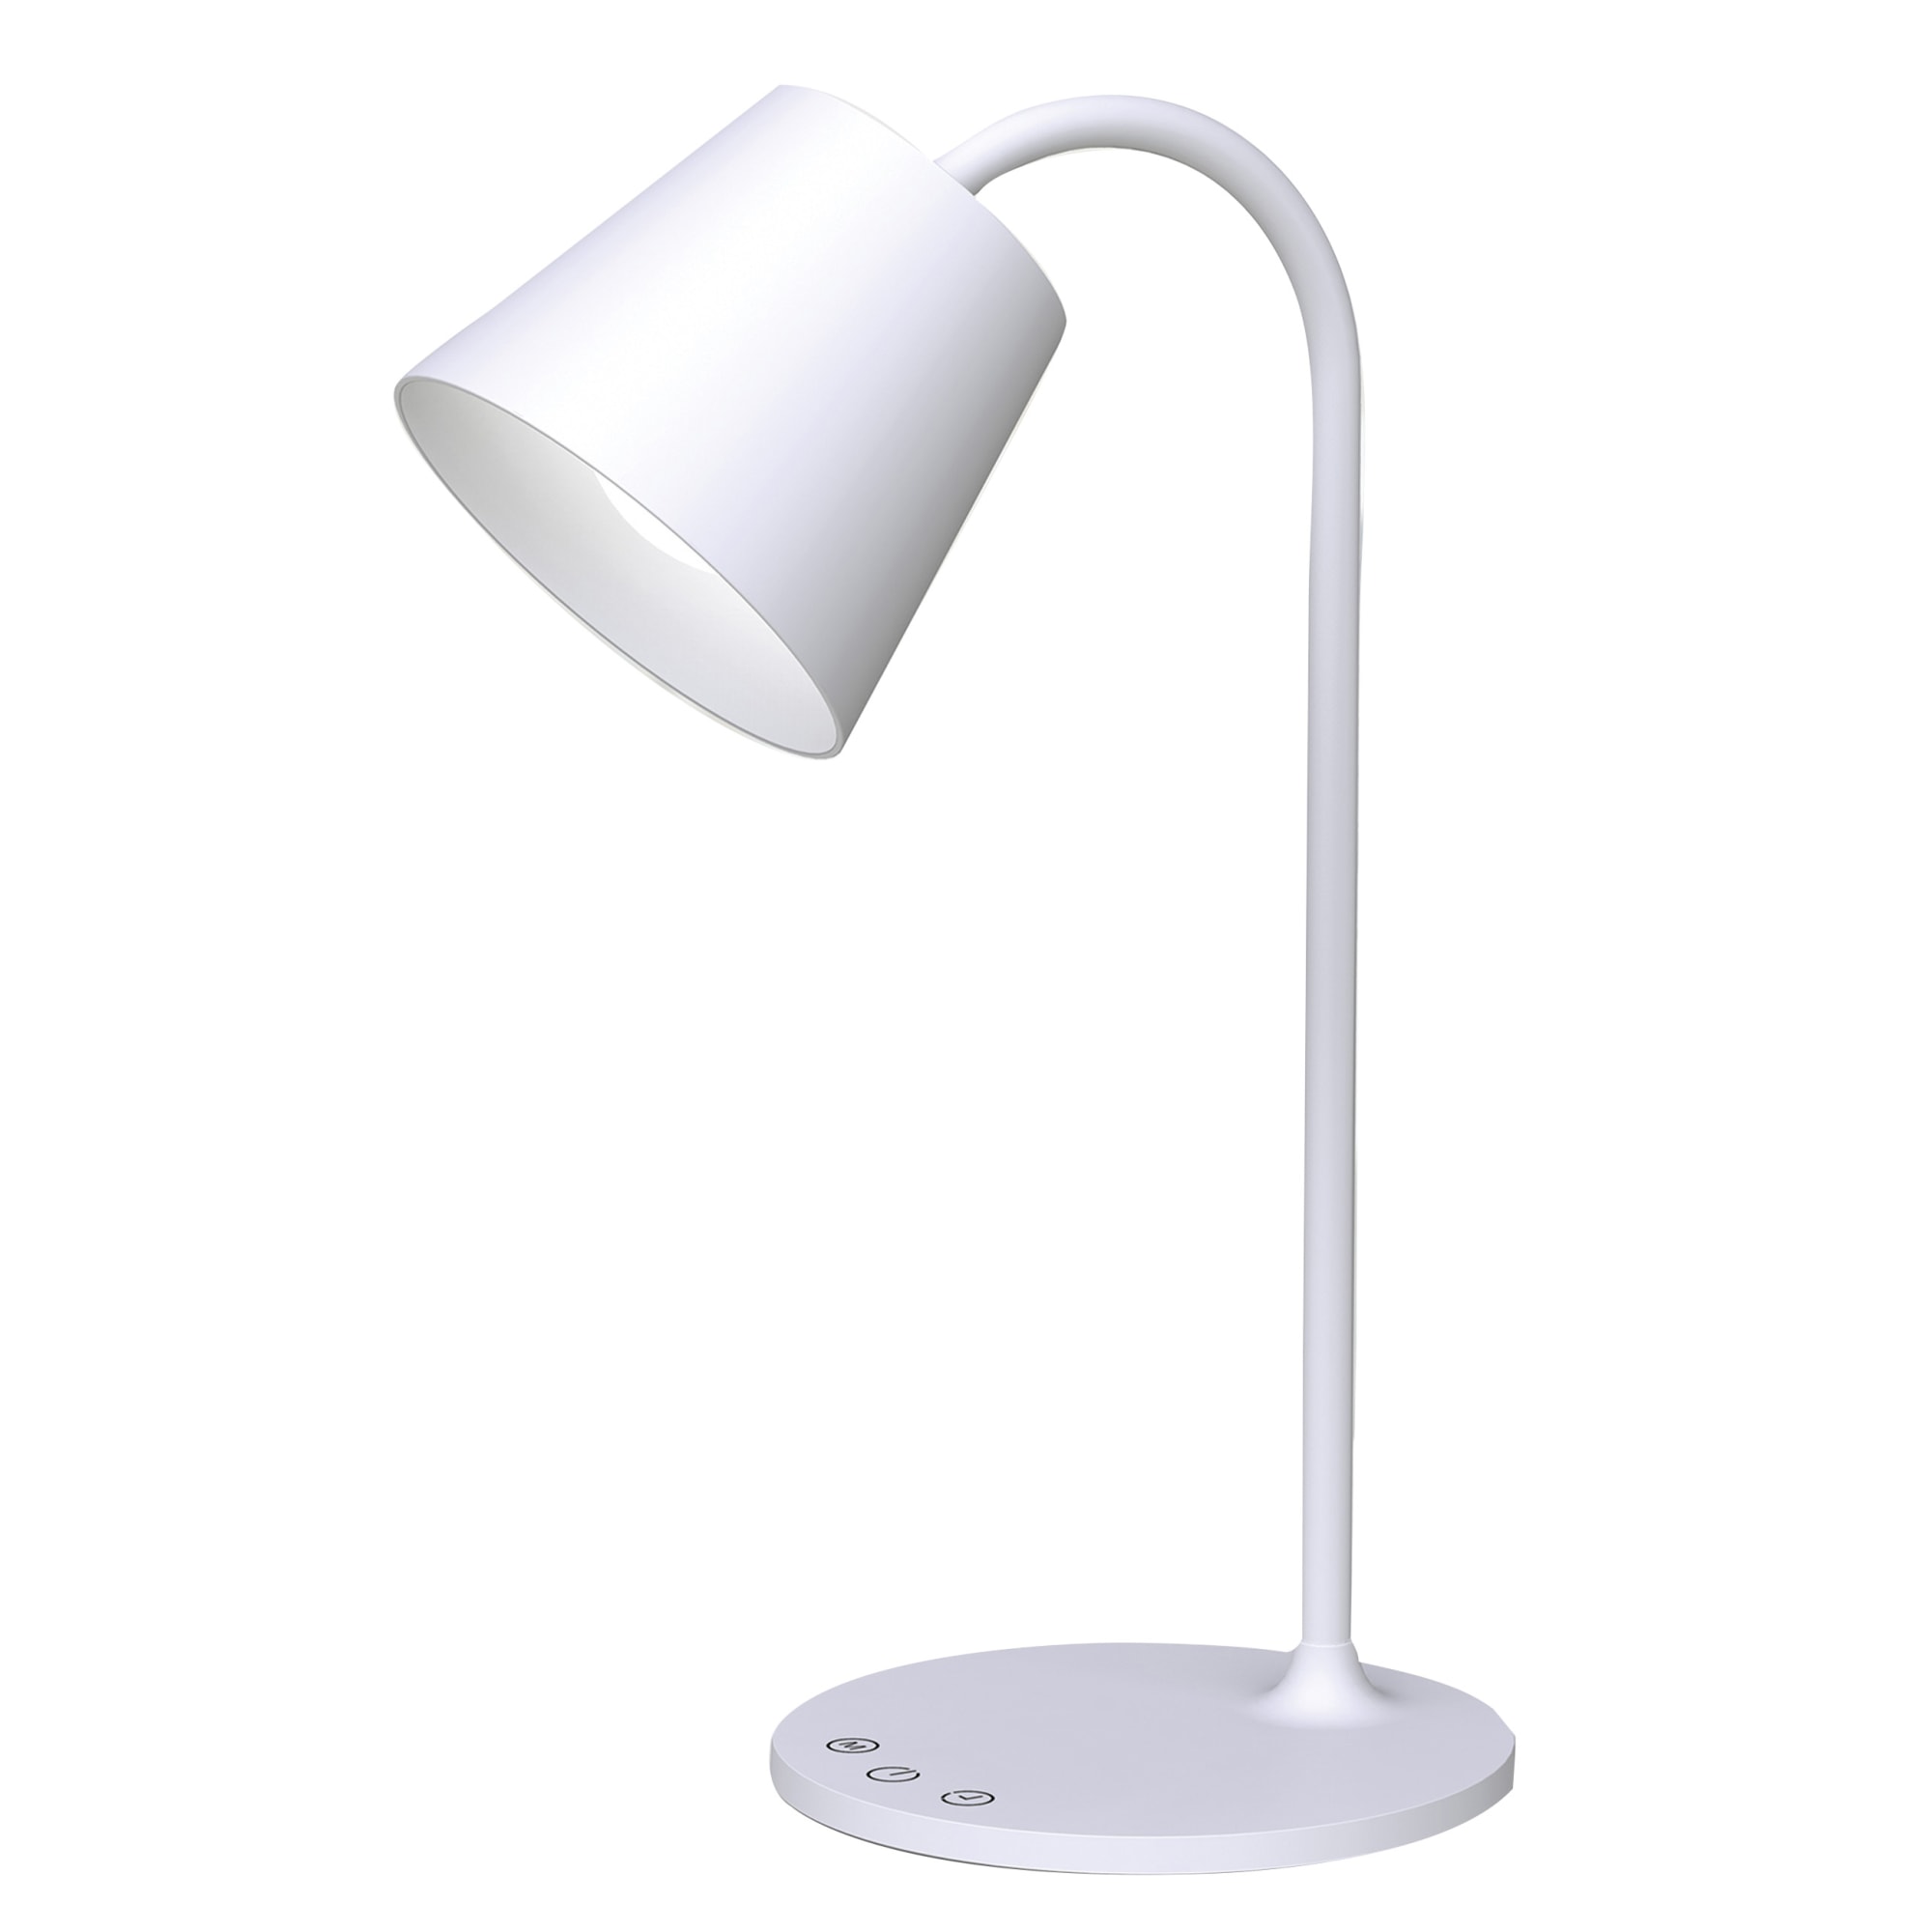 Realspace™ Kessly LED Desk Lamp With USB Port, 17"H, White - image 1 of 7